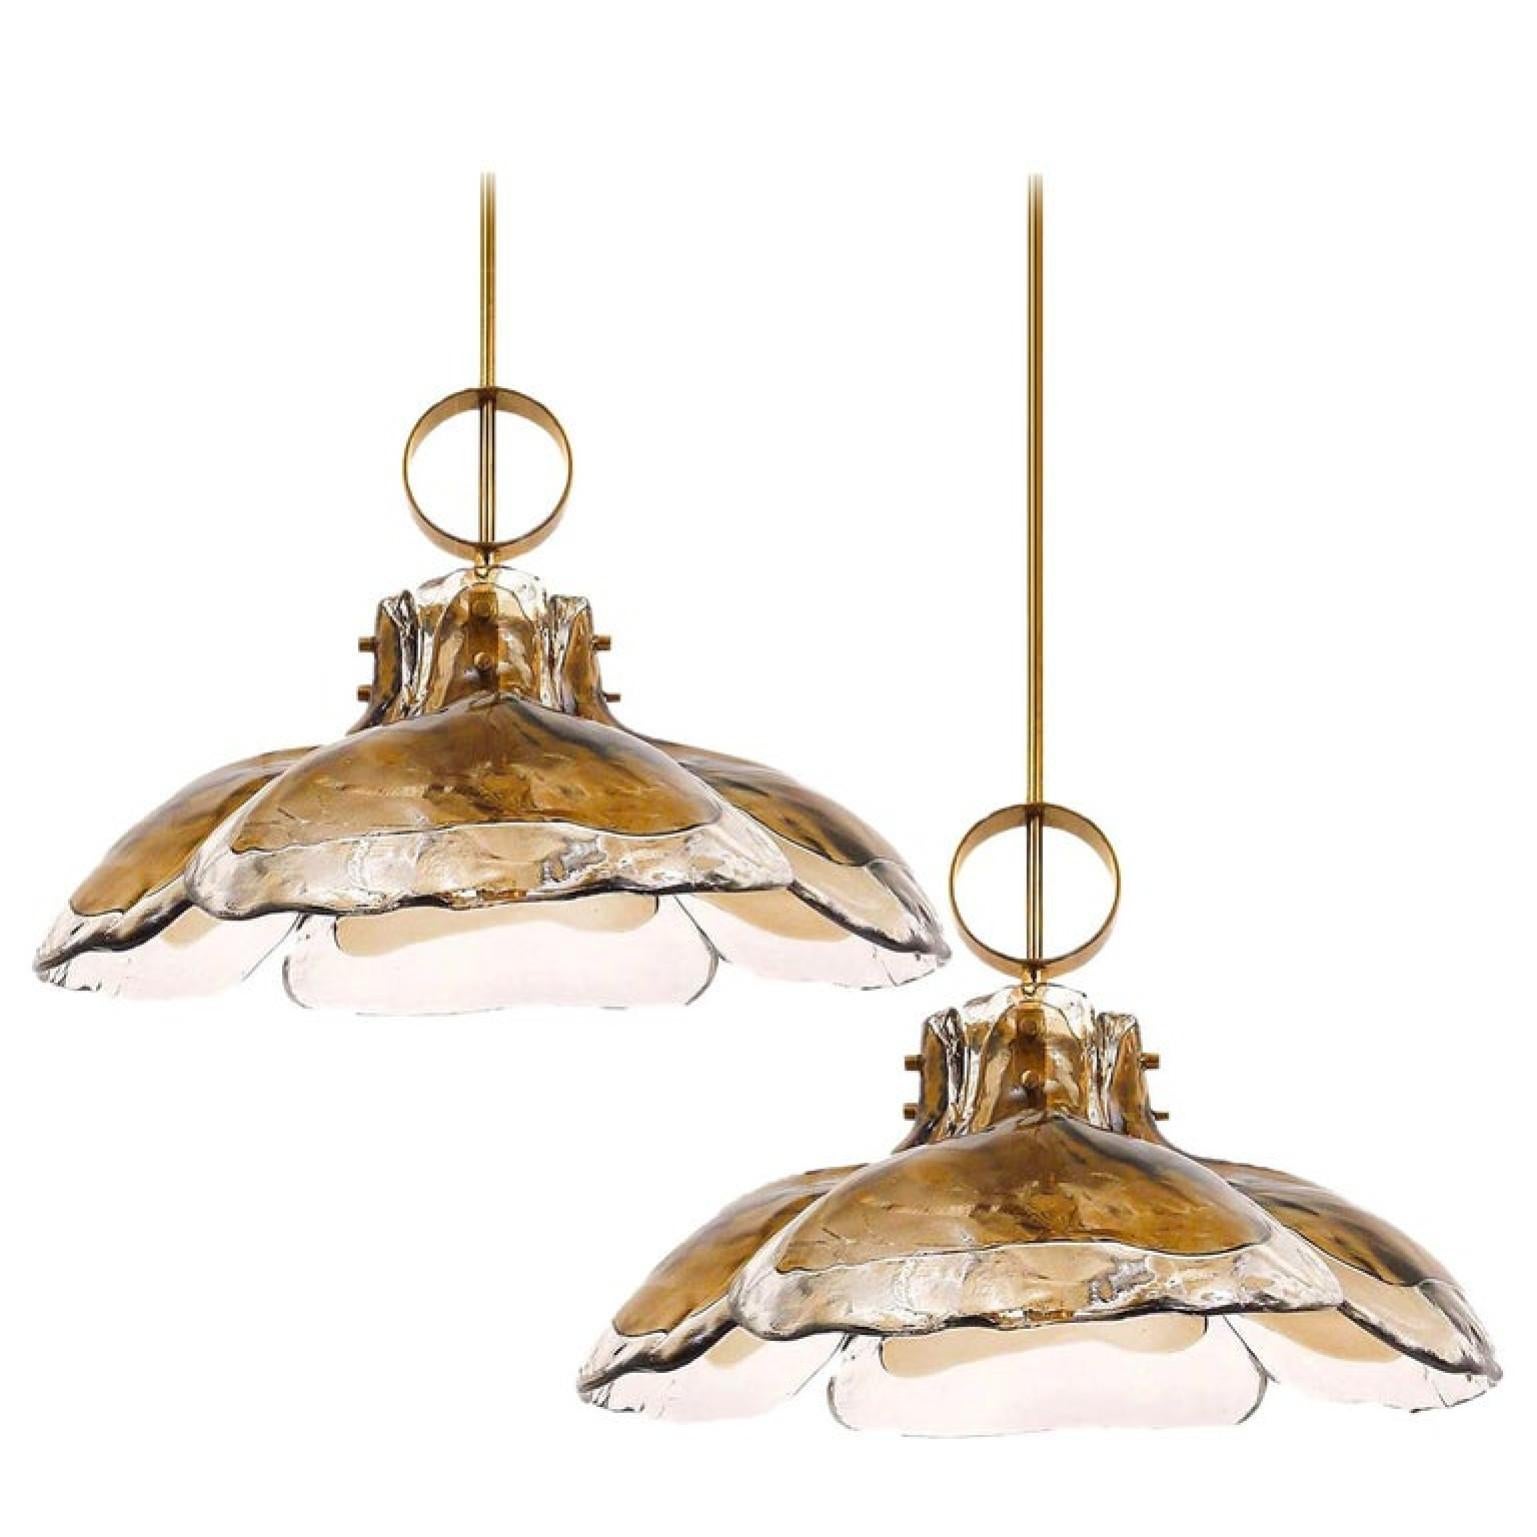 One of two beautiful midcentury brass chandeliers with four melting glass panels in the shape of a flower (diameter 20.7 inch / 51 cm). Illuminates beautifully.

Designed and executed by Kalmar Vienna in the 1970s. Hand blown melting glass, made of